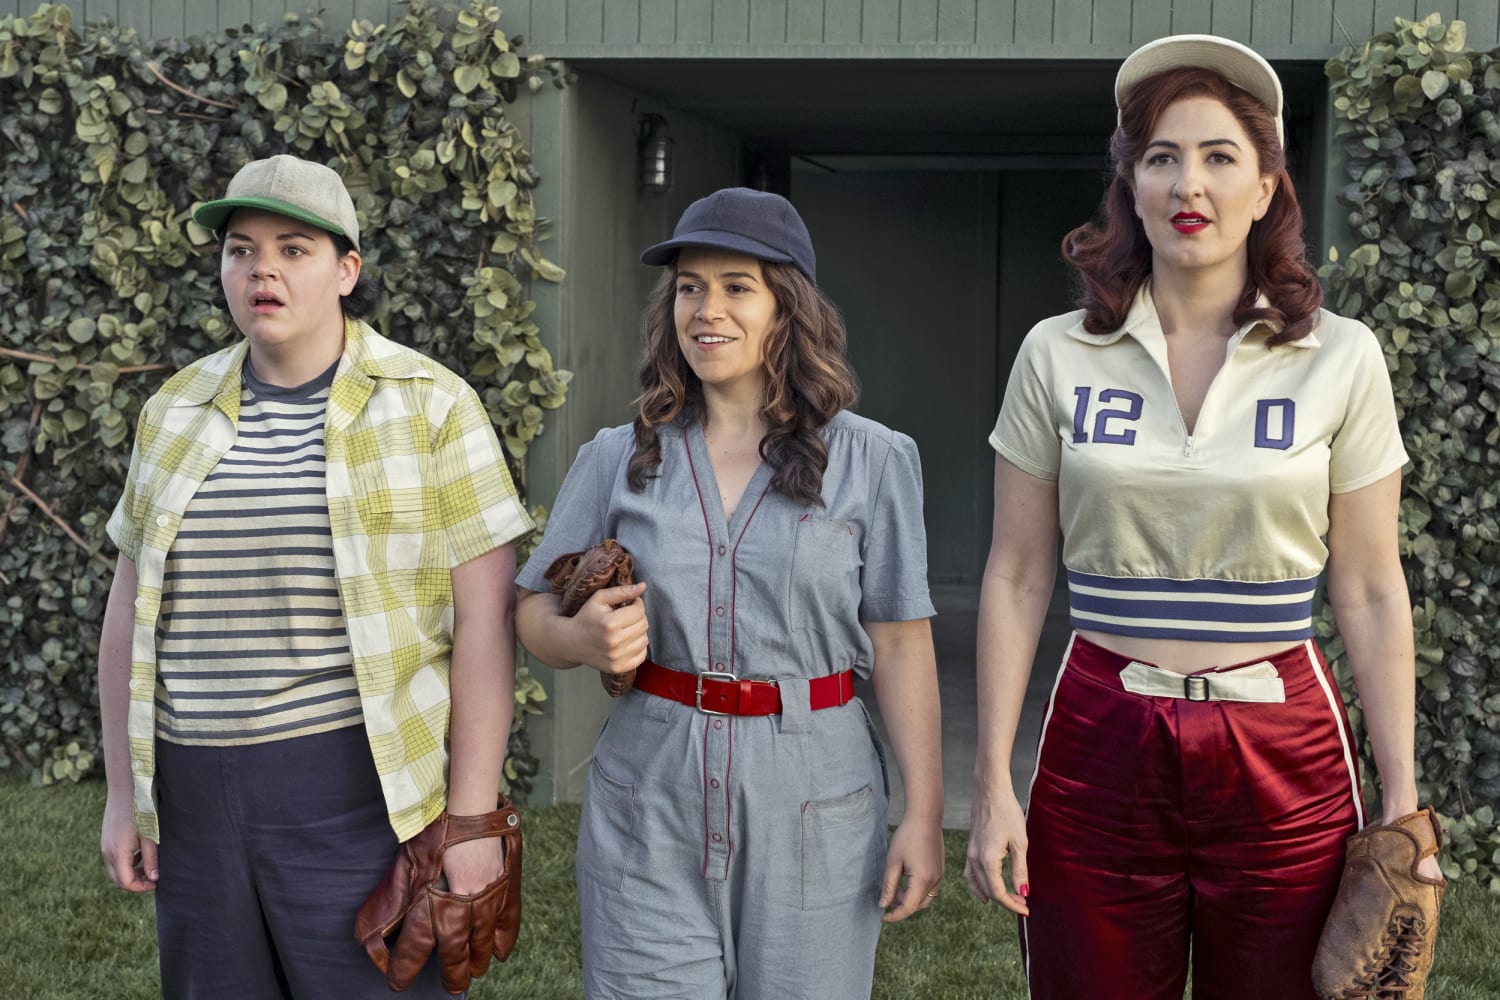 A League of Their Own' remake hits a home run with queer viewers